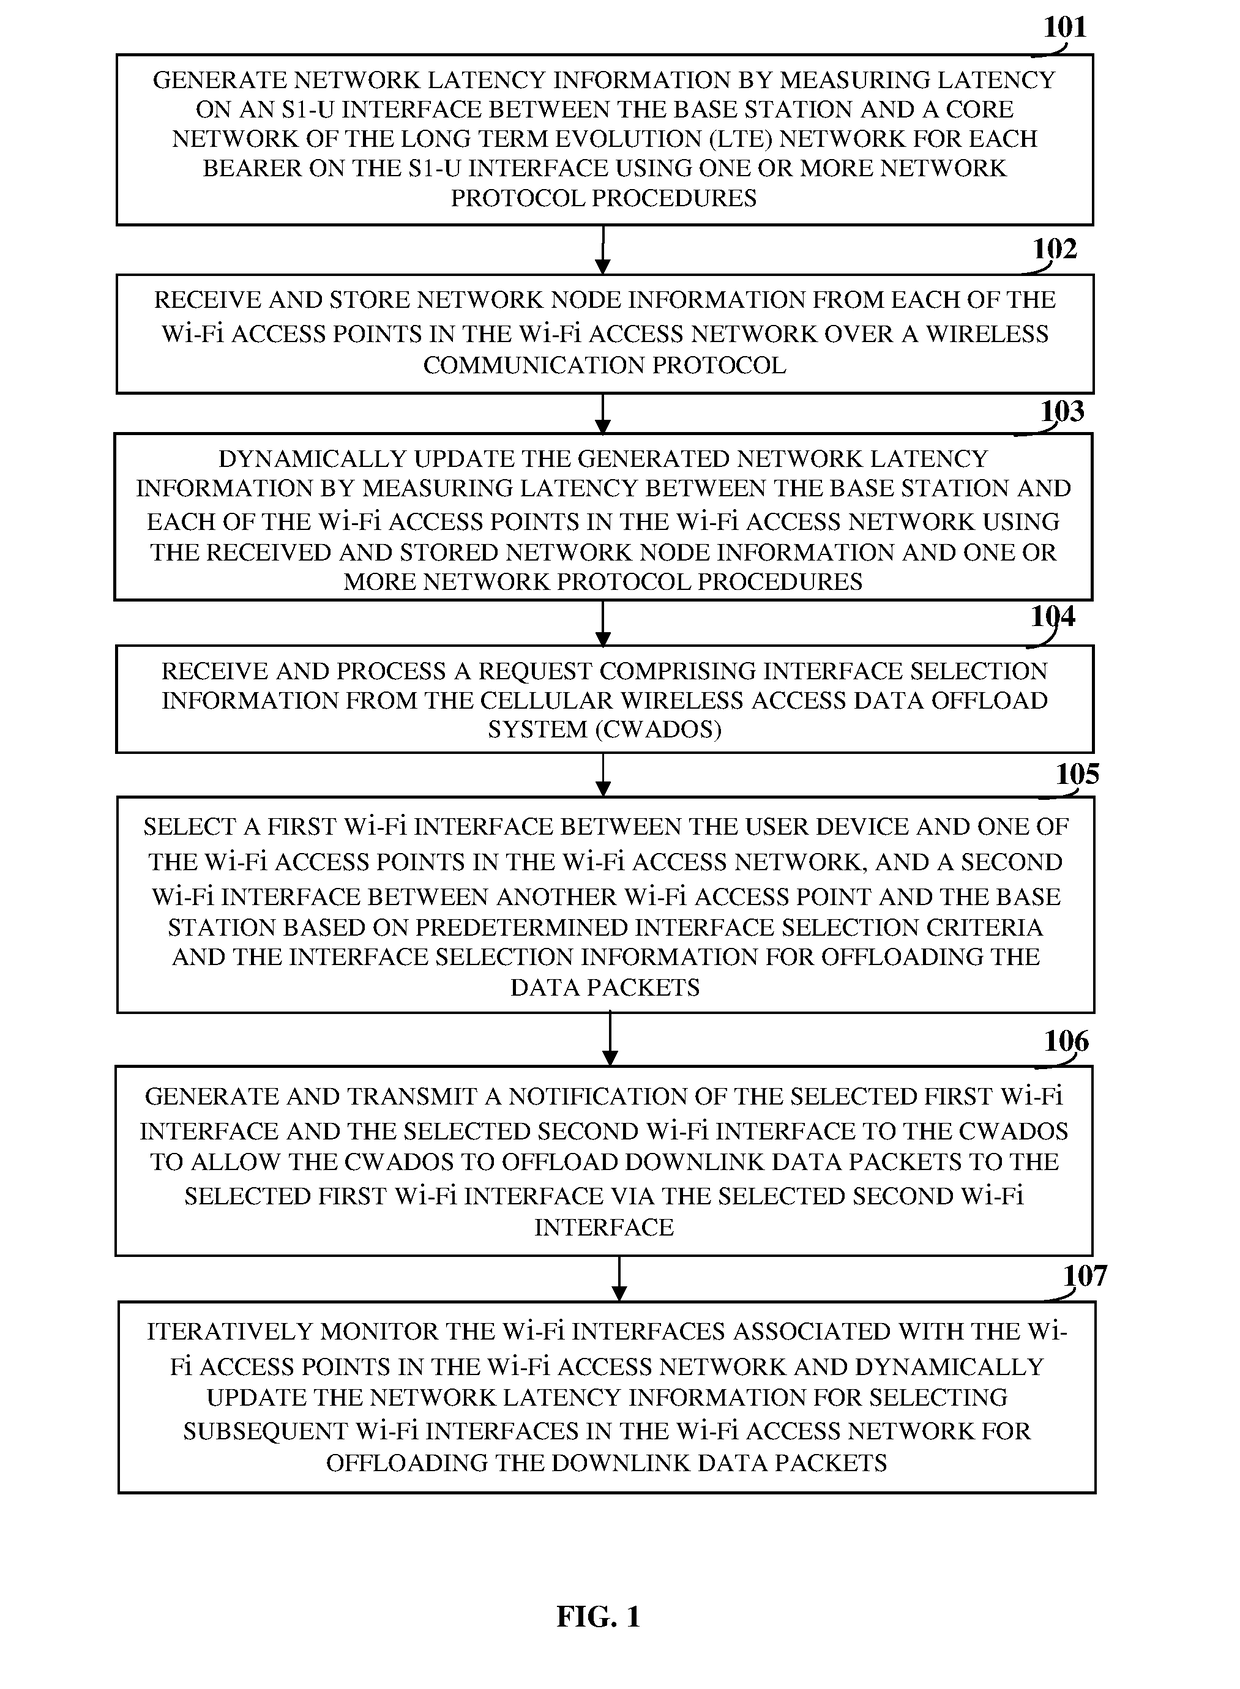 Dynamic Selection And Monitoring Of Wireless Communication Interfaces For Cellular Wireless Access Data Offload In A Wireless Access Network